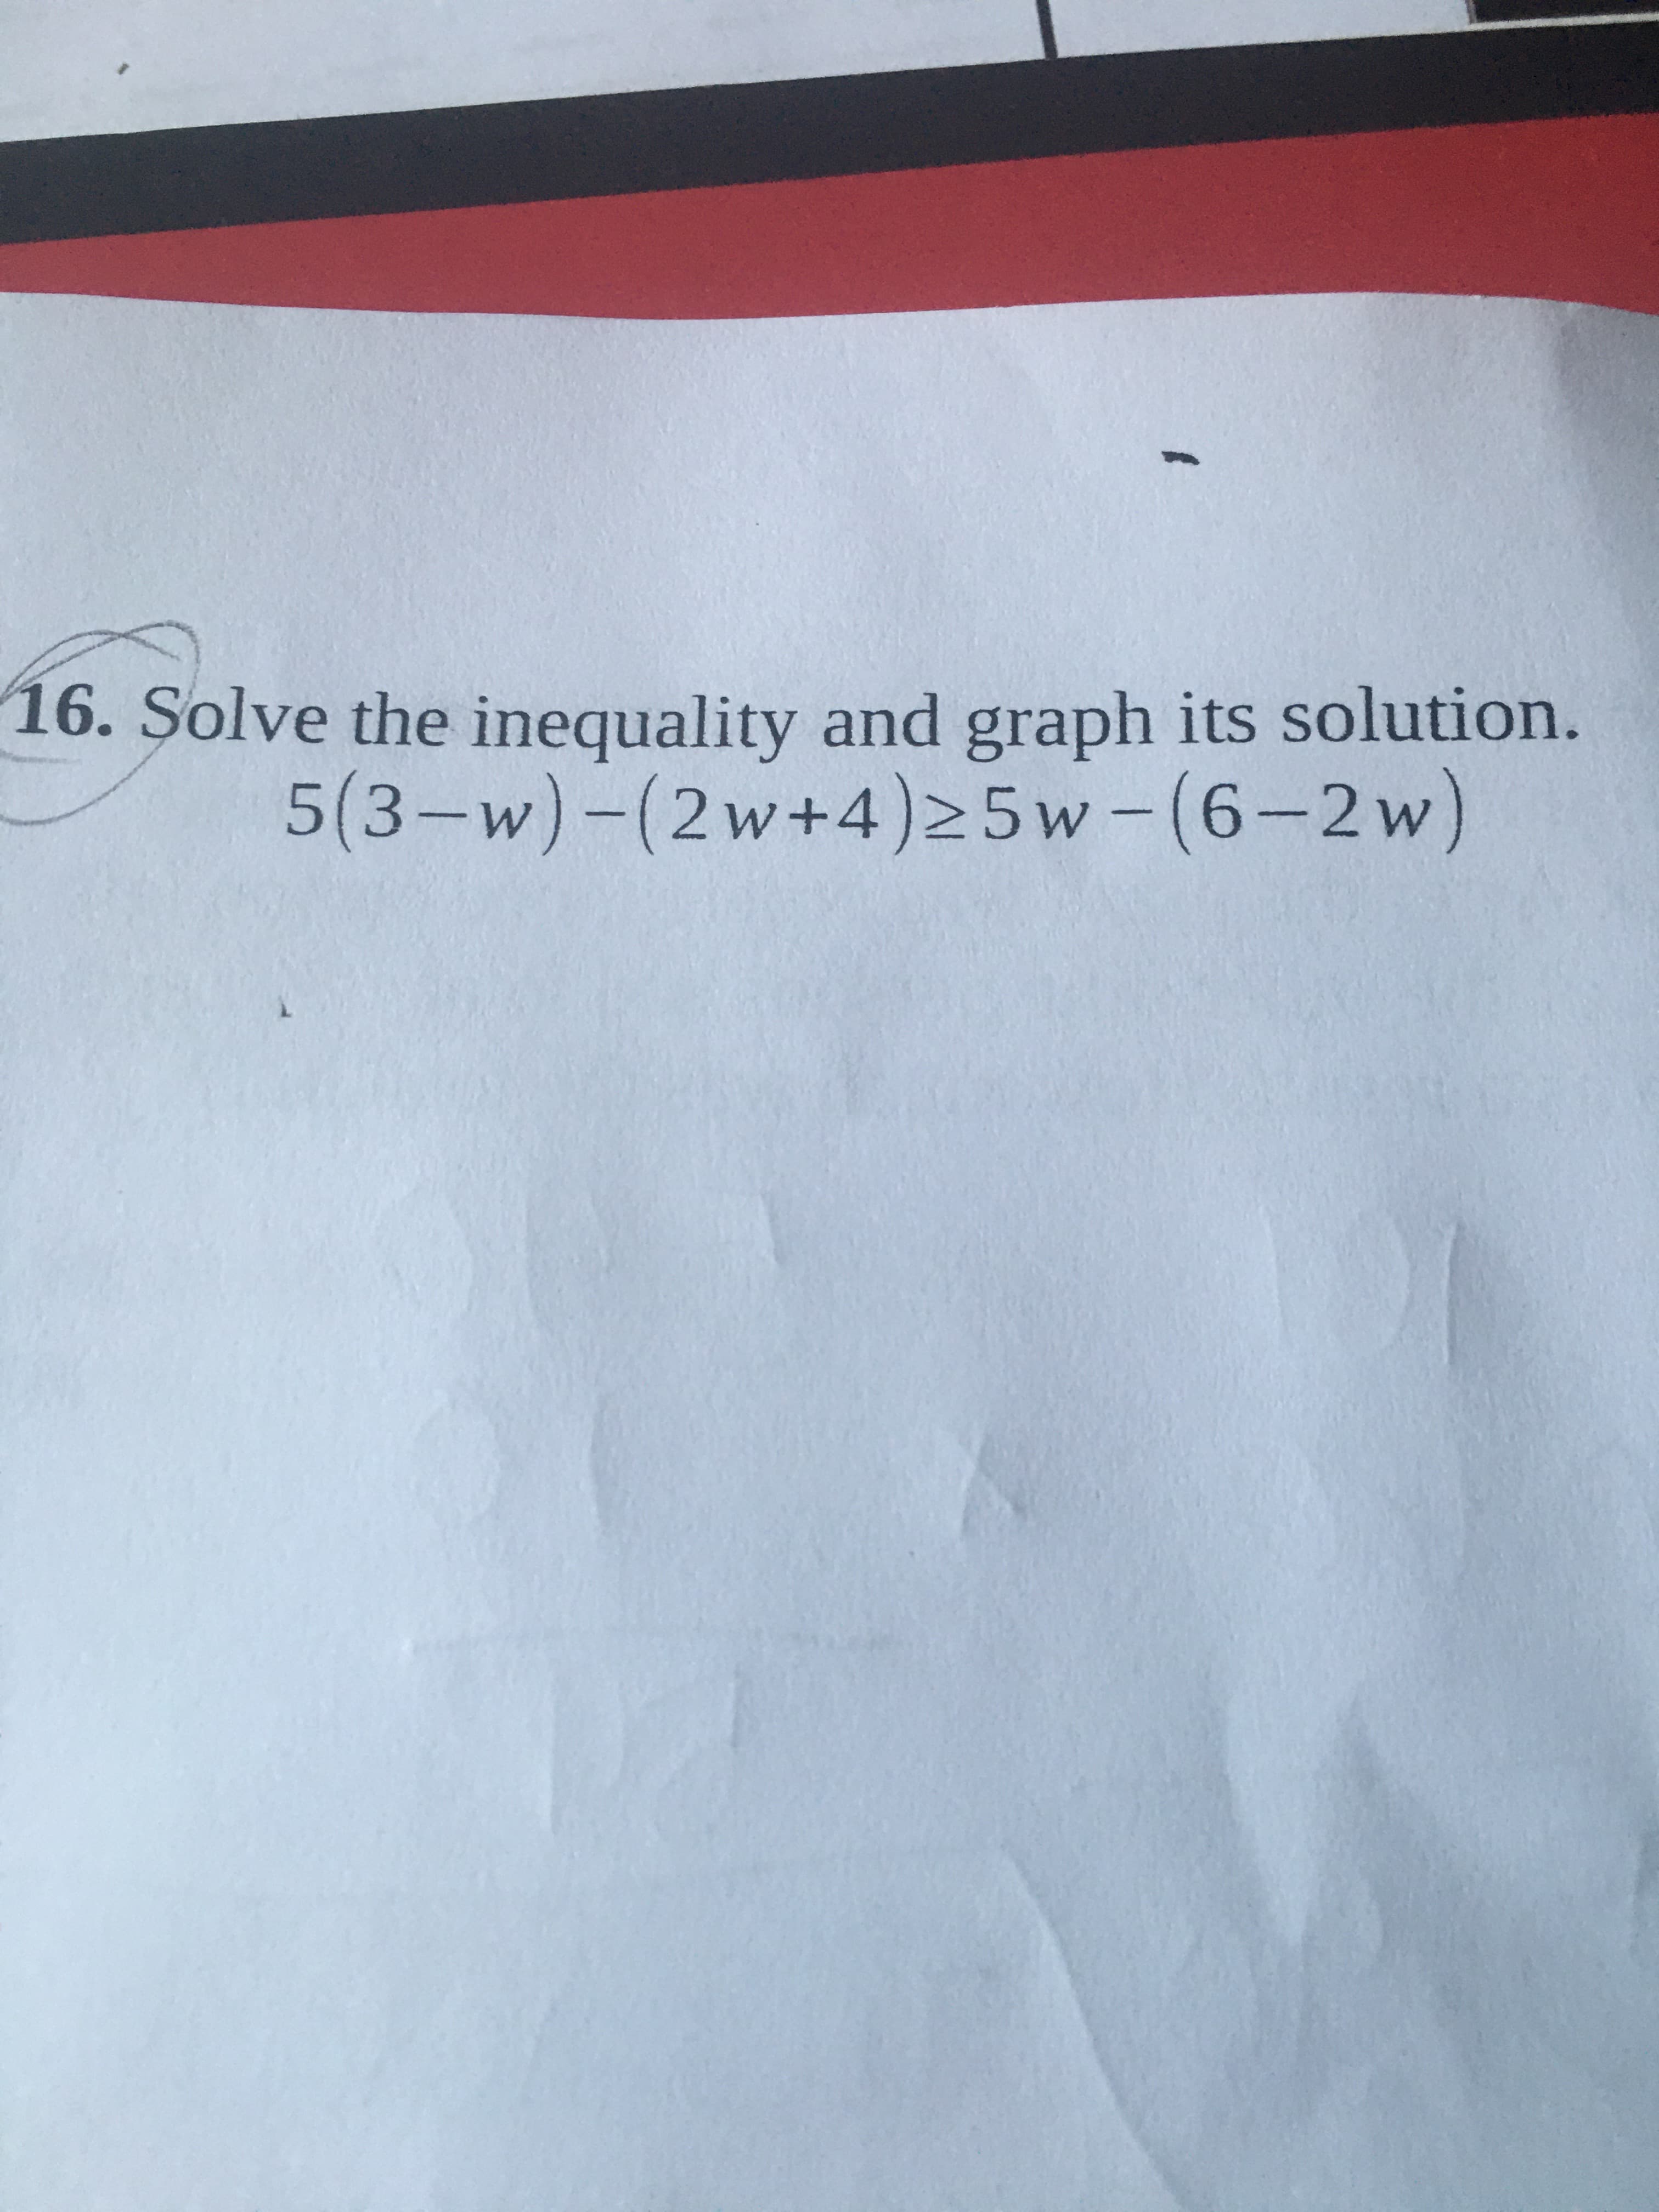 Solve the inequality and graph its solution.
5(3-w)-(2w+4)25w-(6-2 w)
